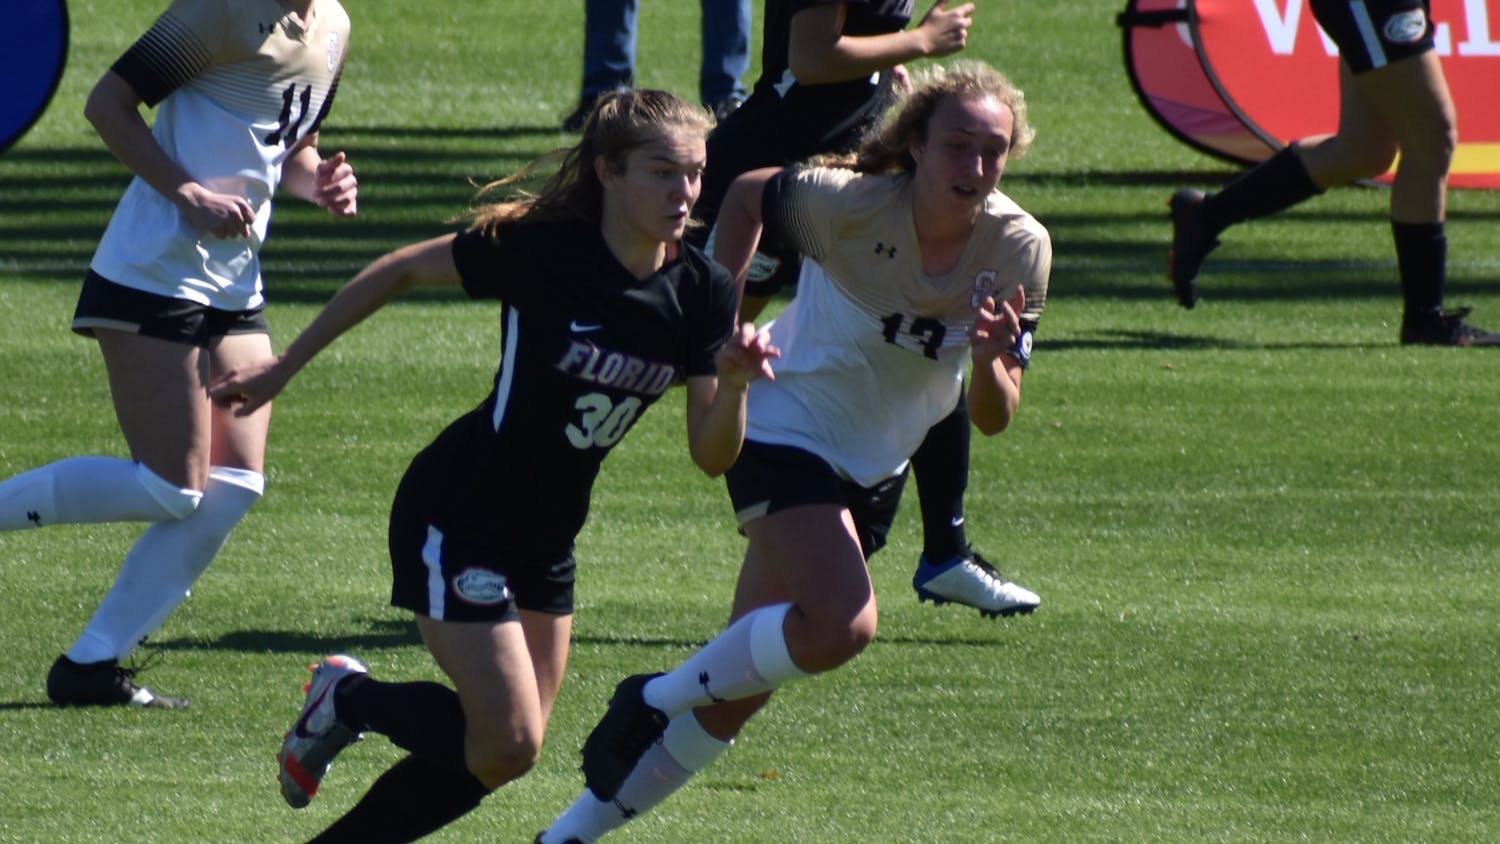 Florida striker Beata Olsson dribbles past a defender Feb. 20 against College of Charleston. The Swedish international scored an early equalizer Monday.